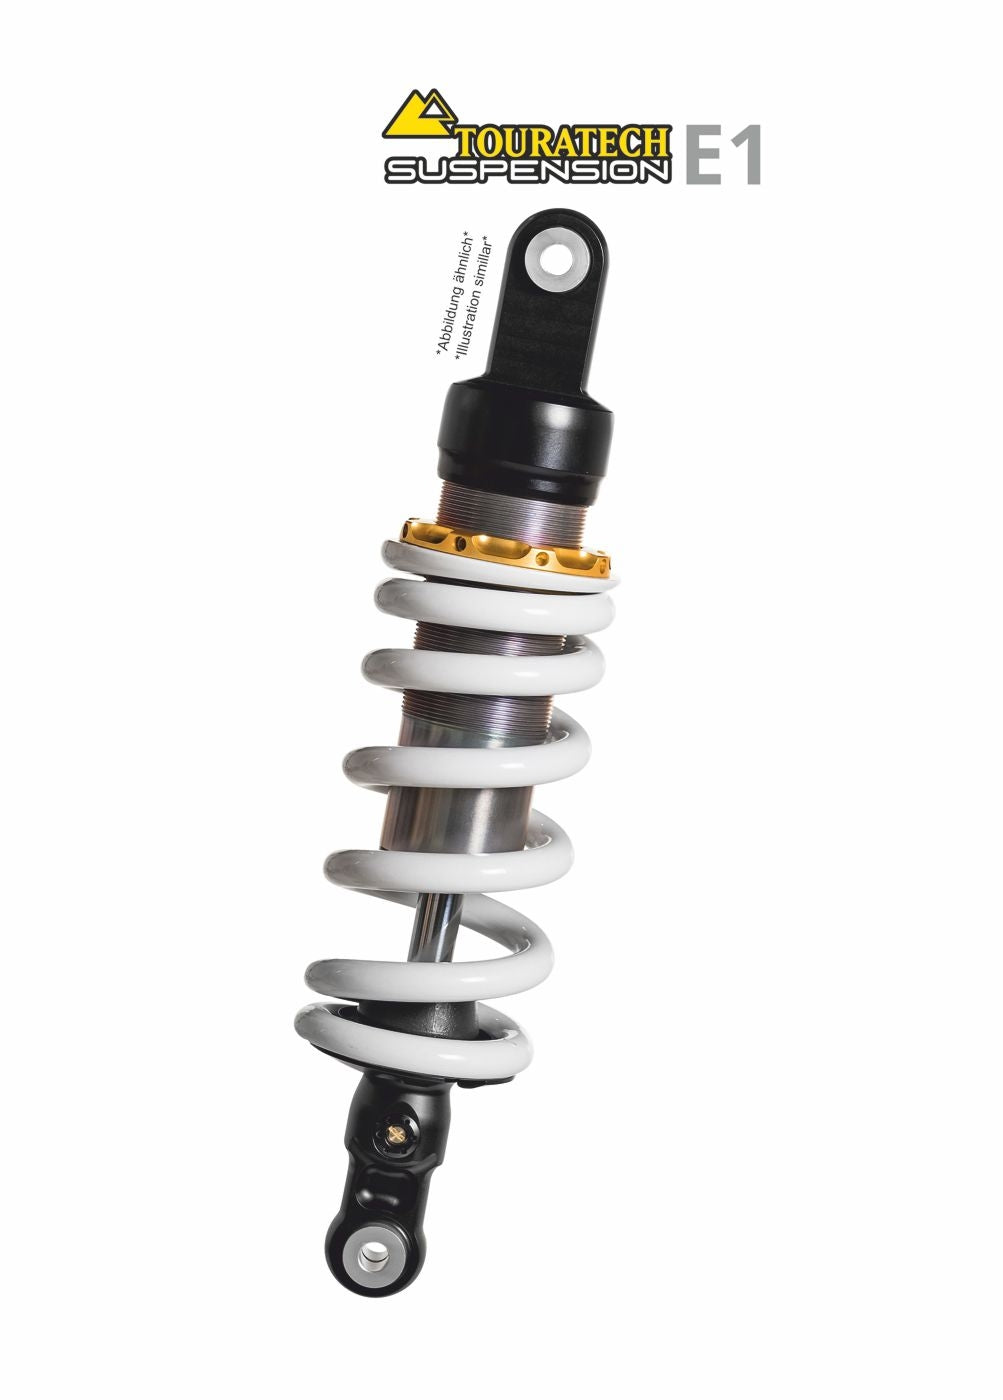 Touratech Suspension E1 shock absorber for BMW F 650 1994 - 2000